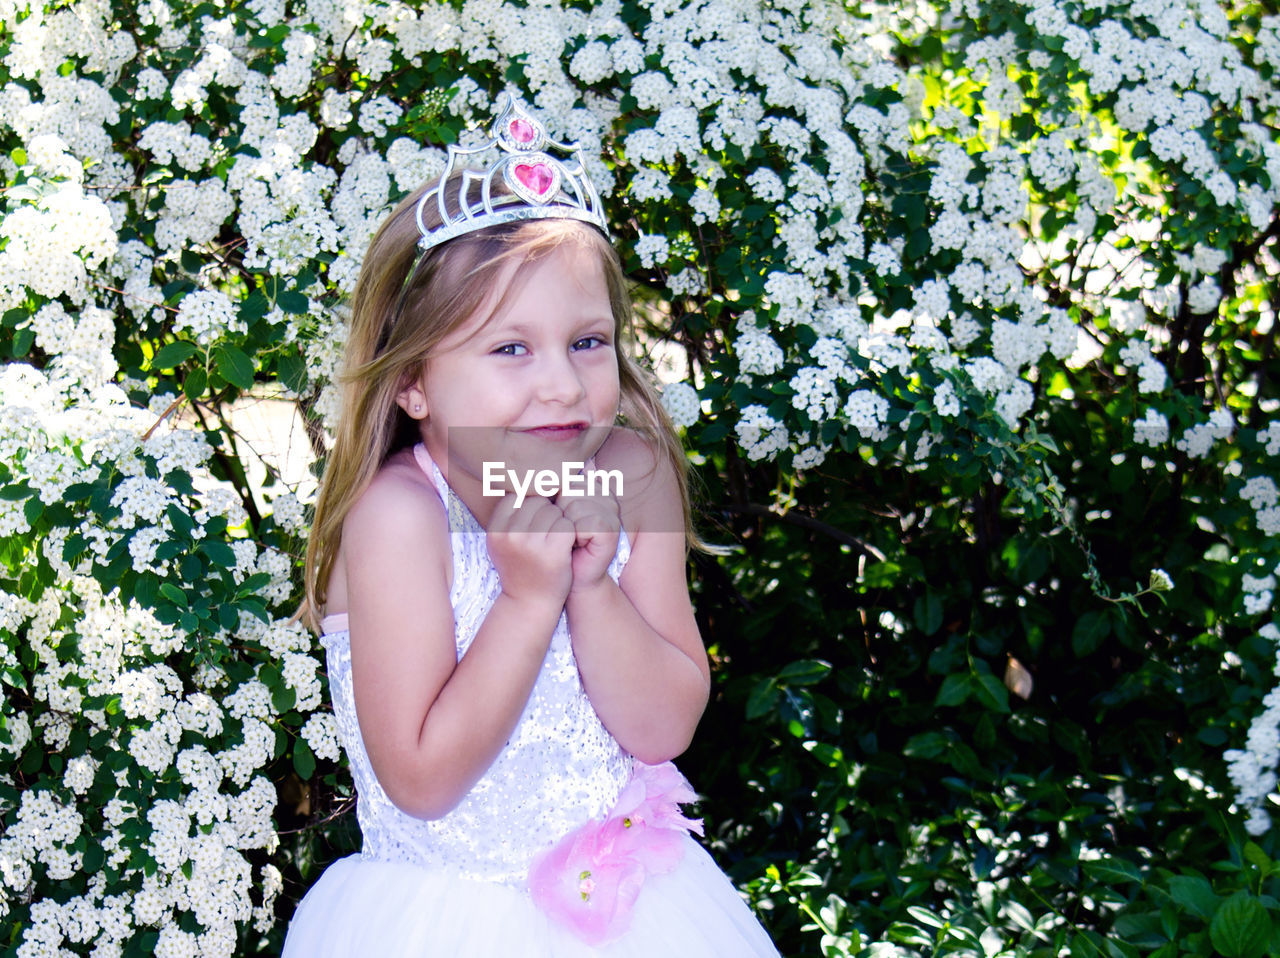 Little girl in a princess costume with toy tiara, is happy to be a young pretend royal